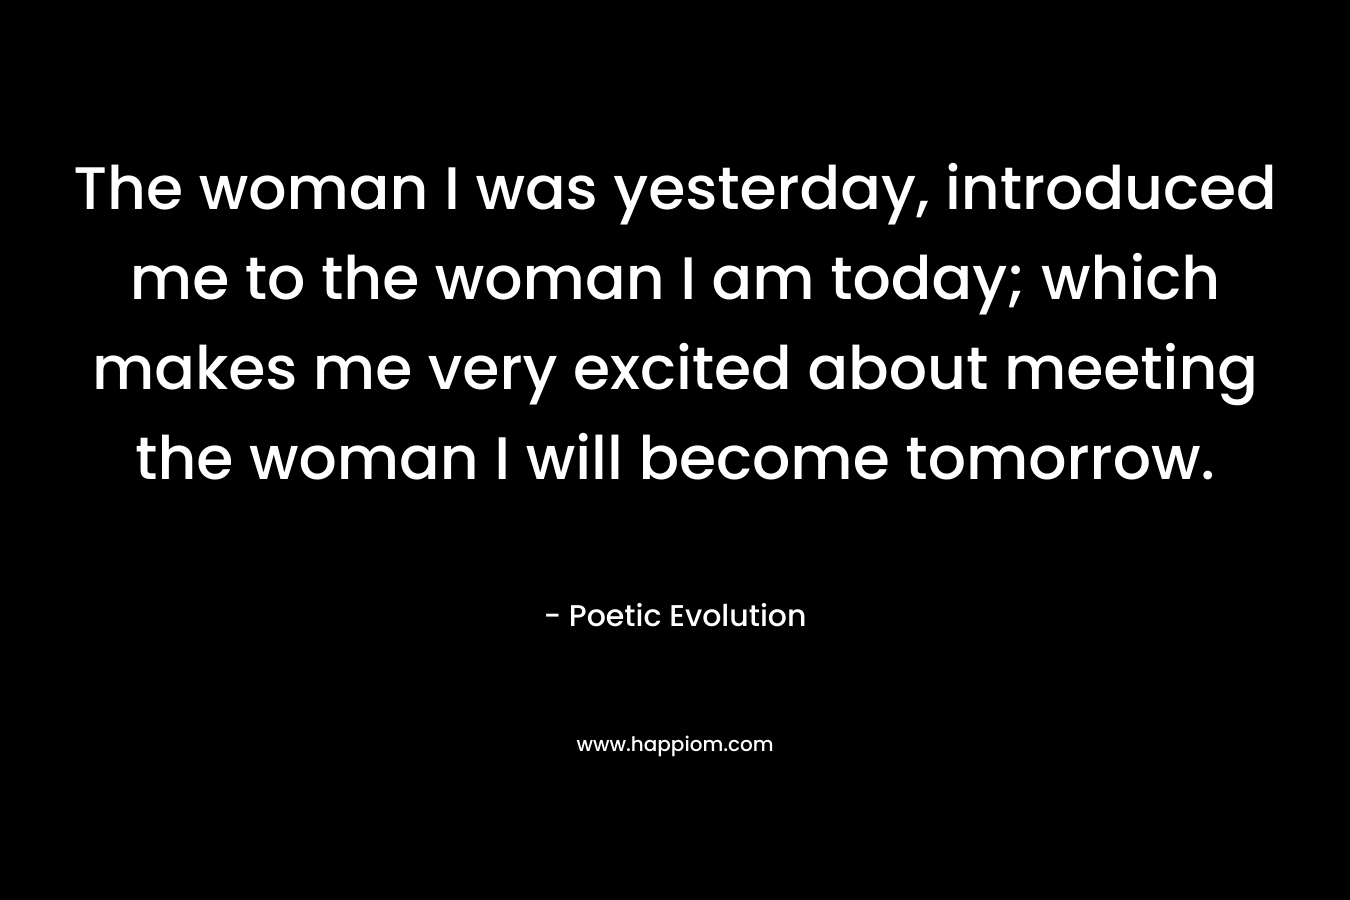 The woman I was yesterday, introduced me to the woman I am today; which makes me very excited about meeting the woman I will become tomorrow.  – Poetic Evolution